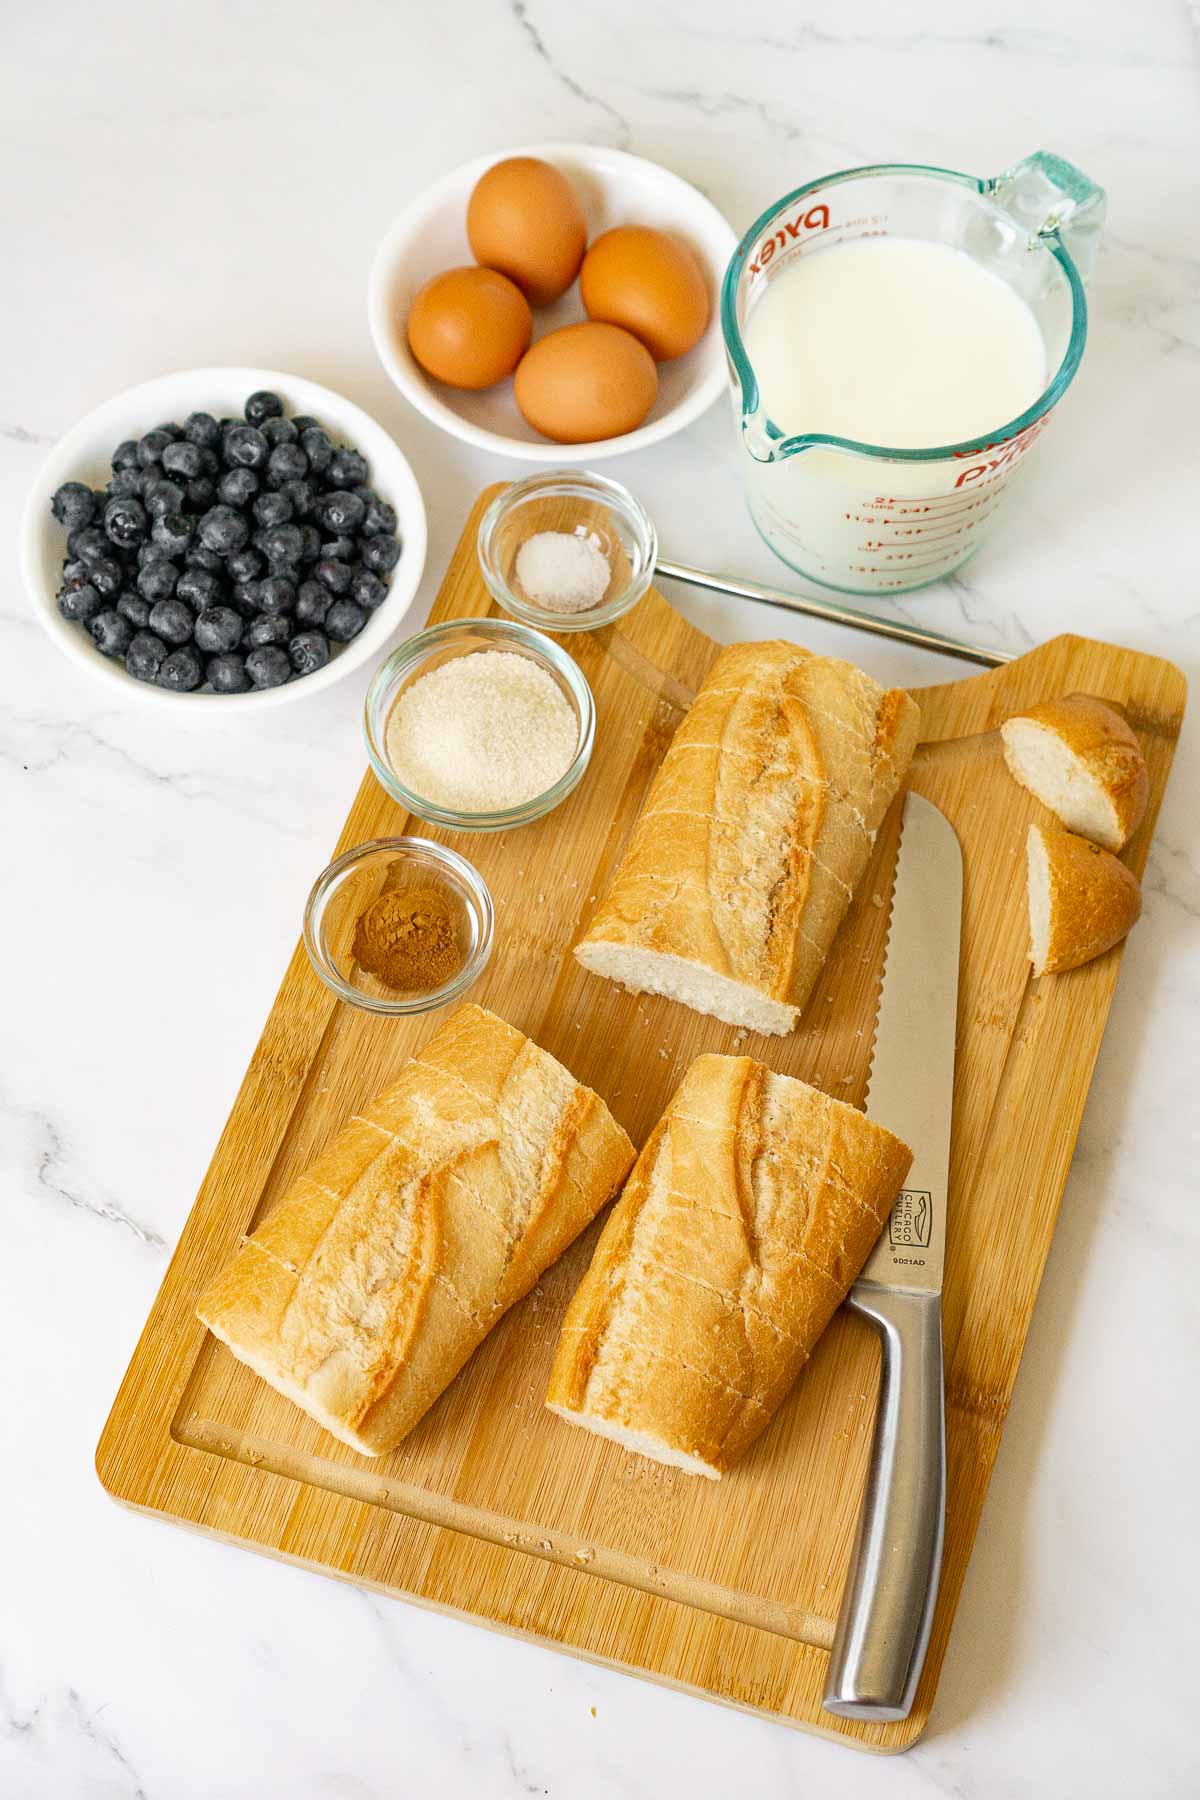 Ingredients to make blueberry Hasselback French toast